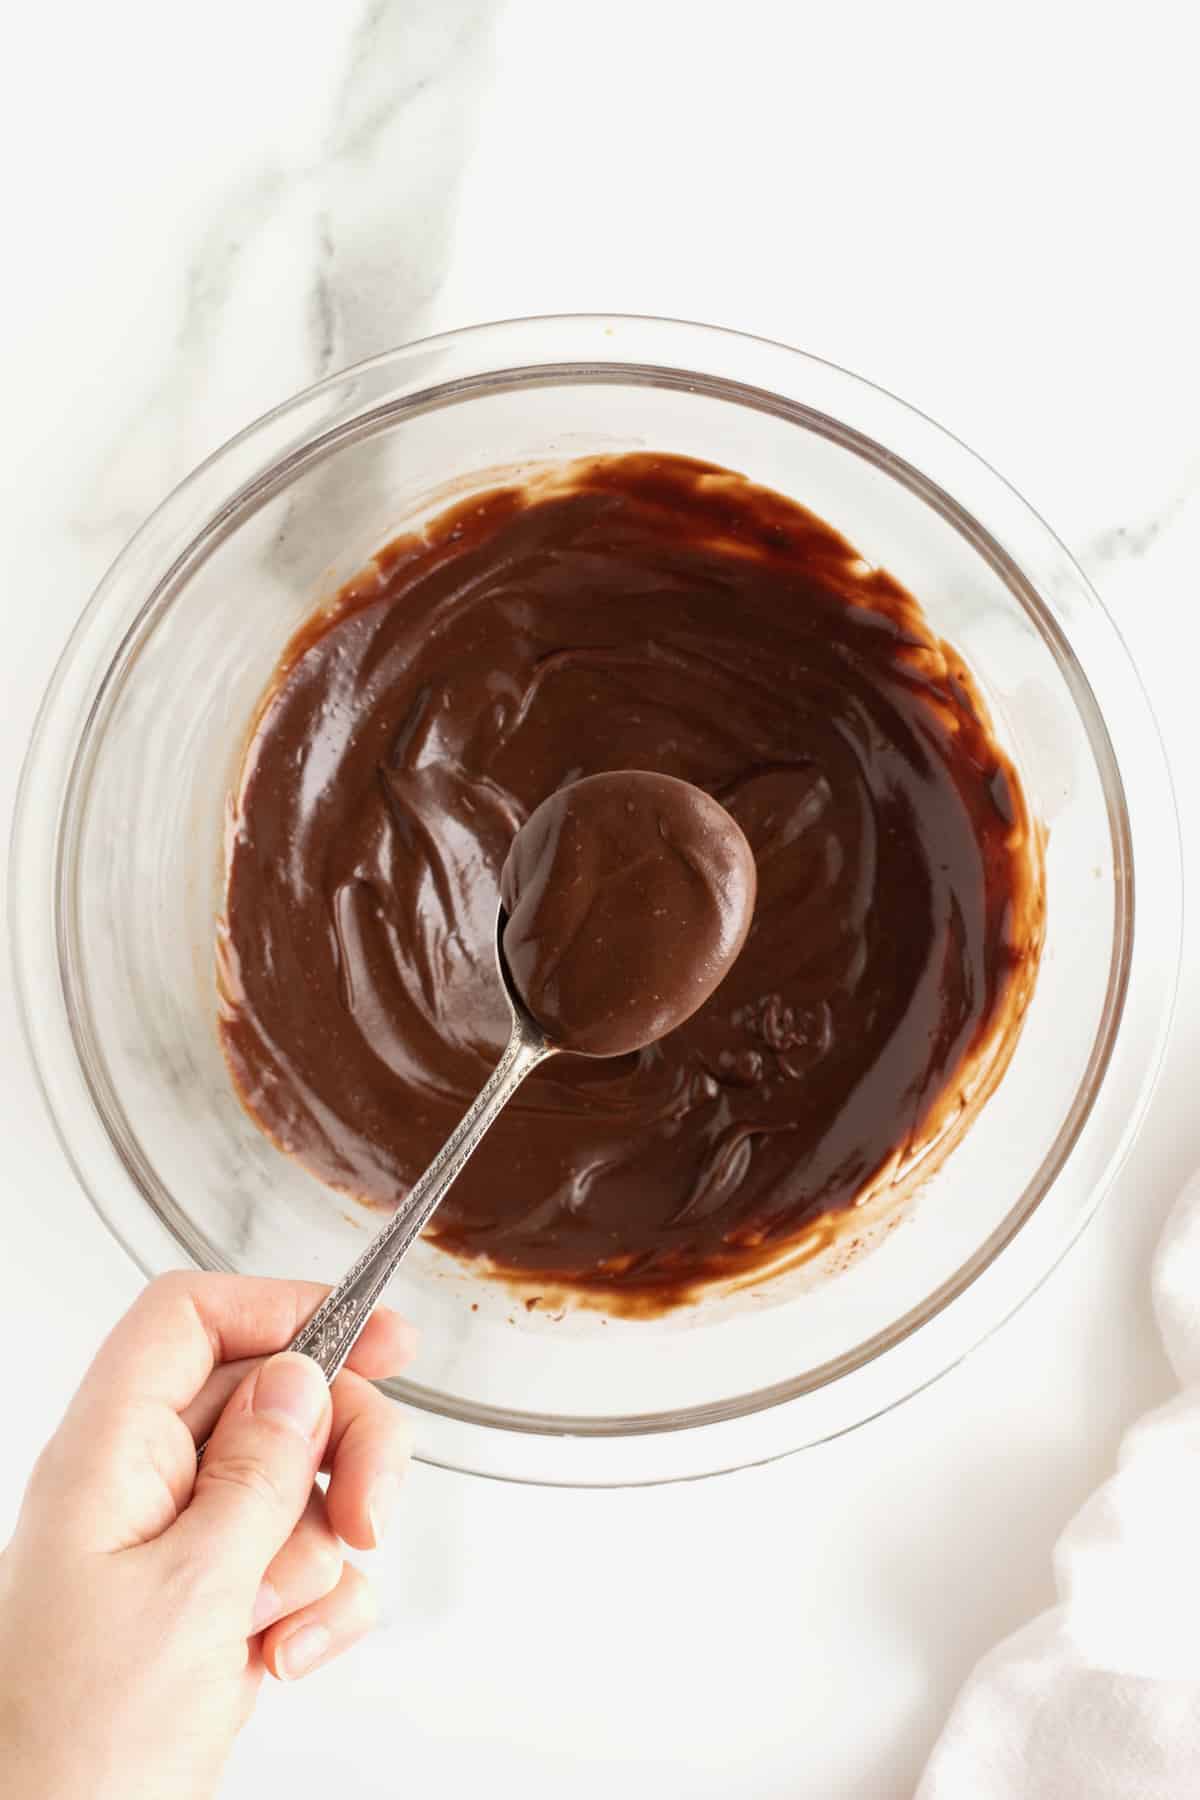 Chocolate ganache in a clear glass bowl with a hand holding a spoonful of chocolate over it.